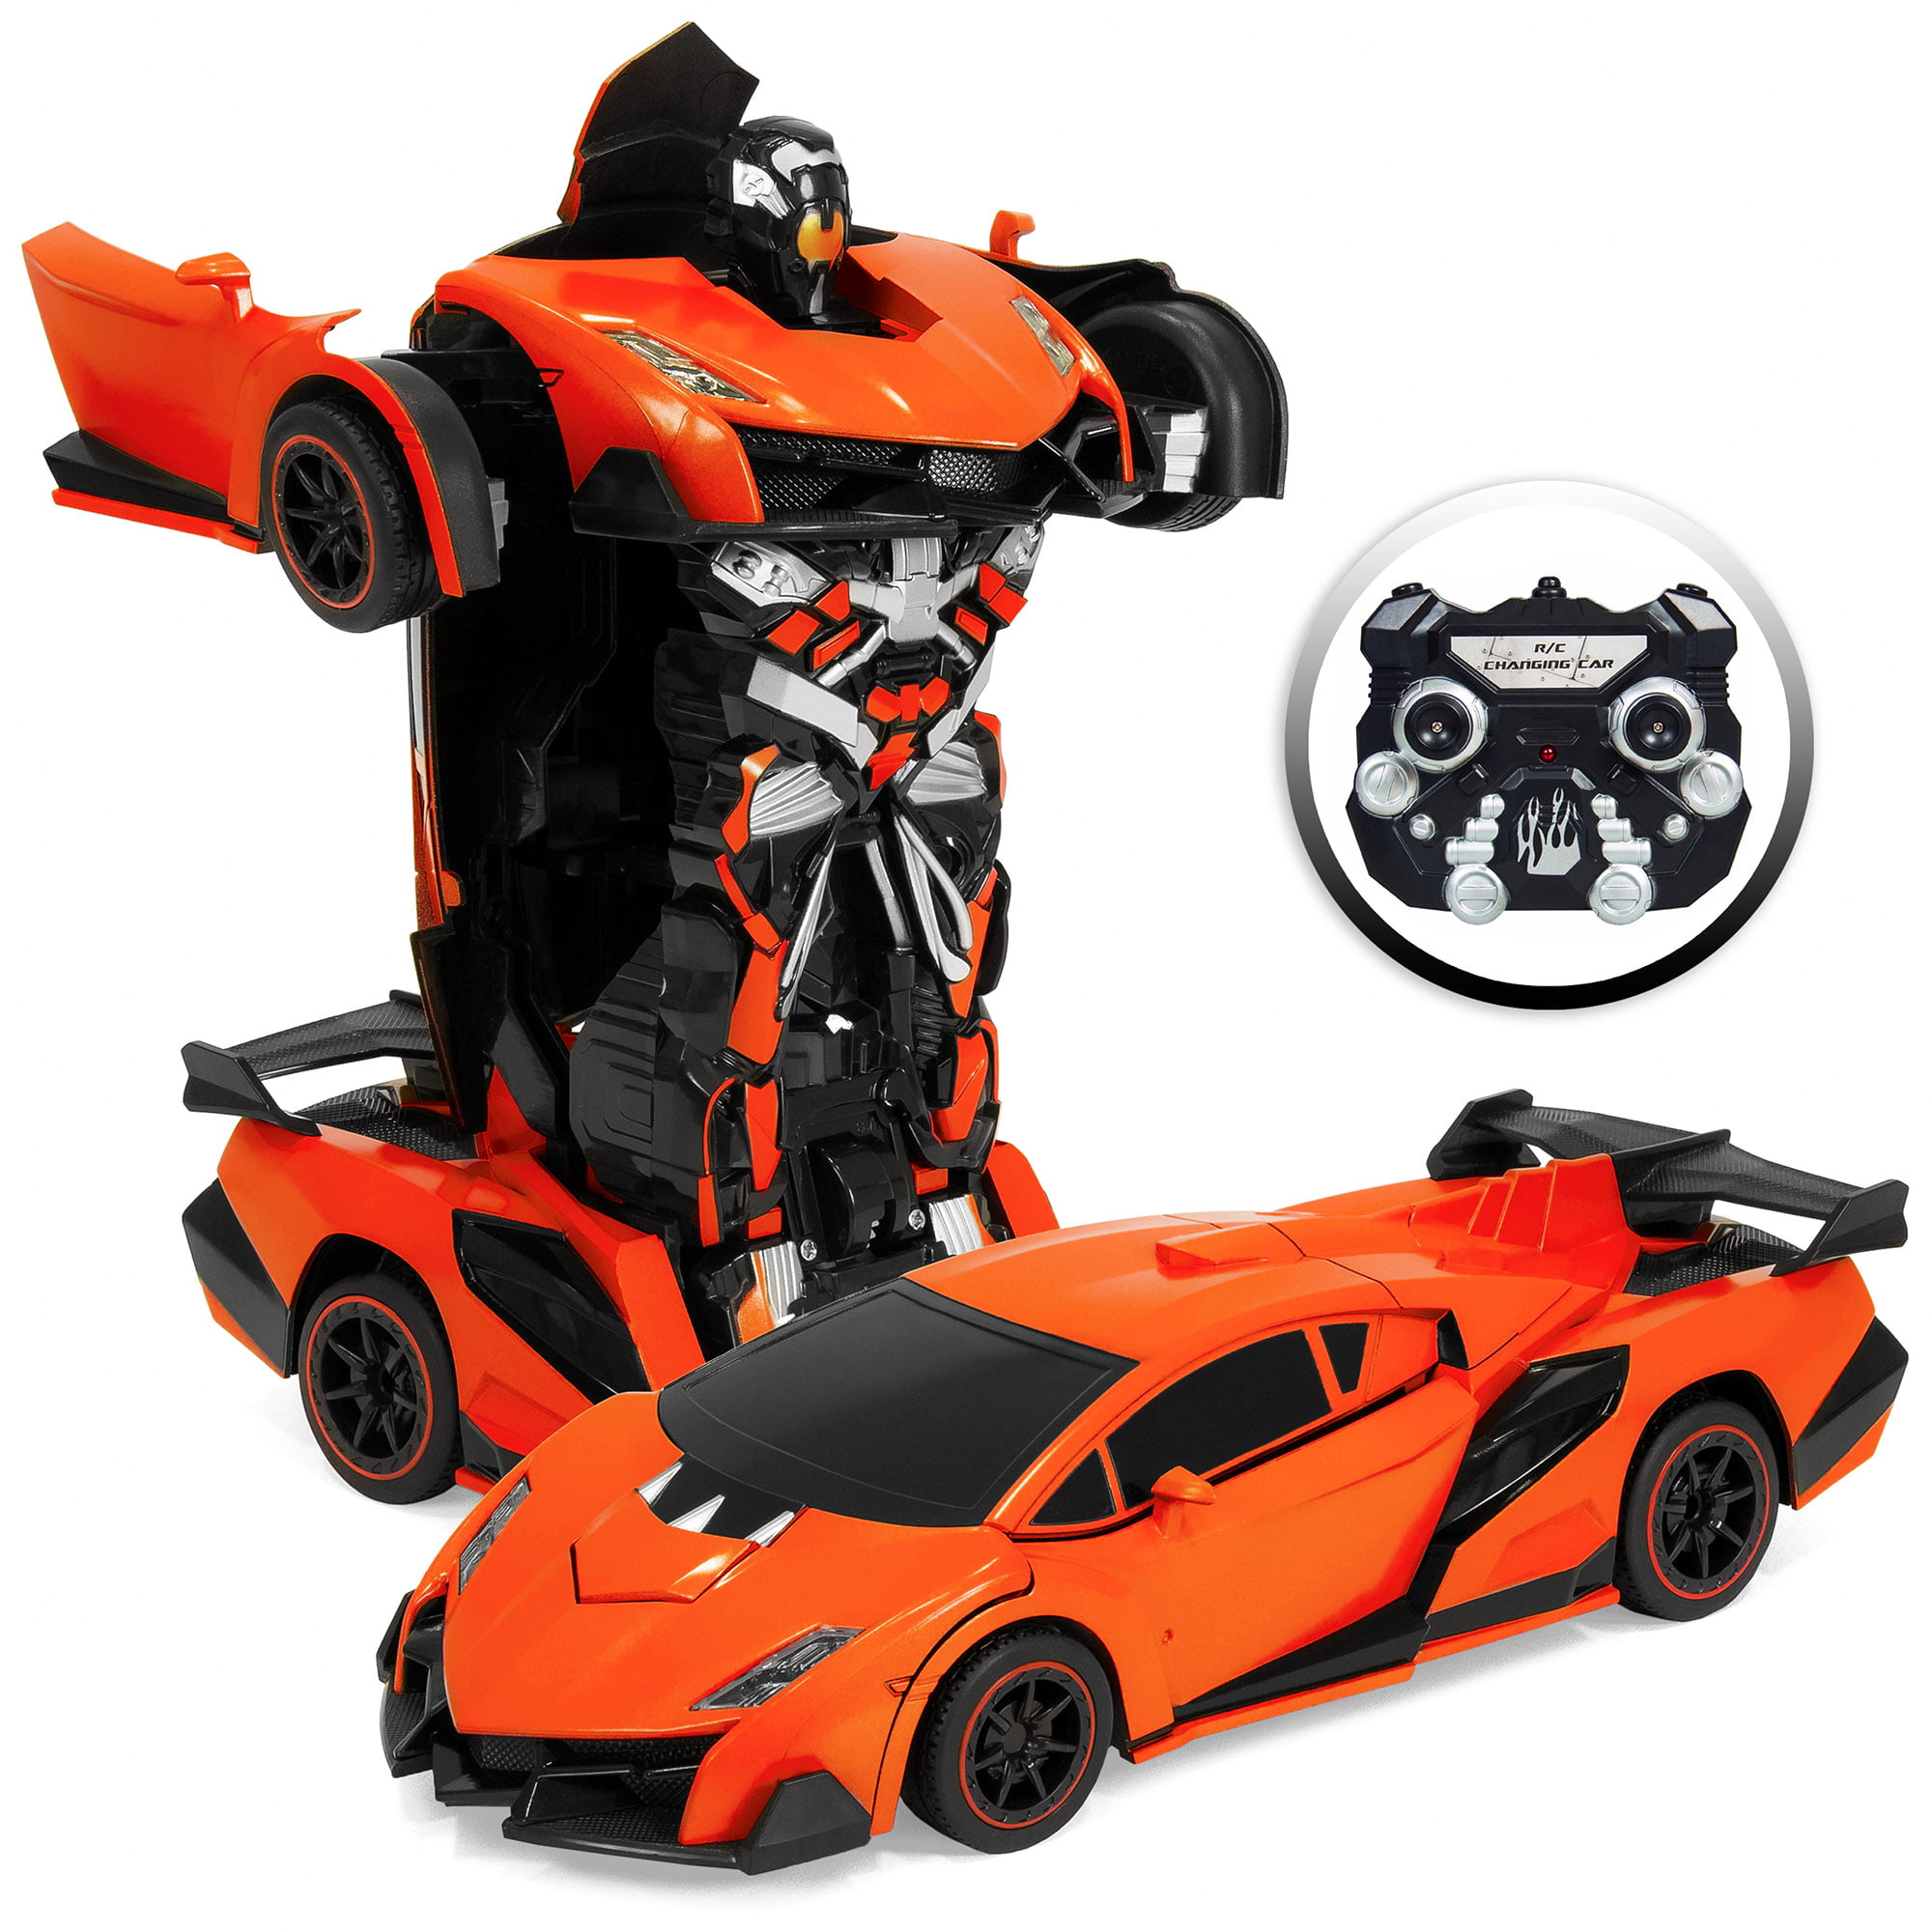 1:16 Scale Gale Rc Car Kids Toy good quality easy to use orange 